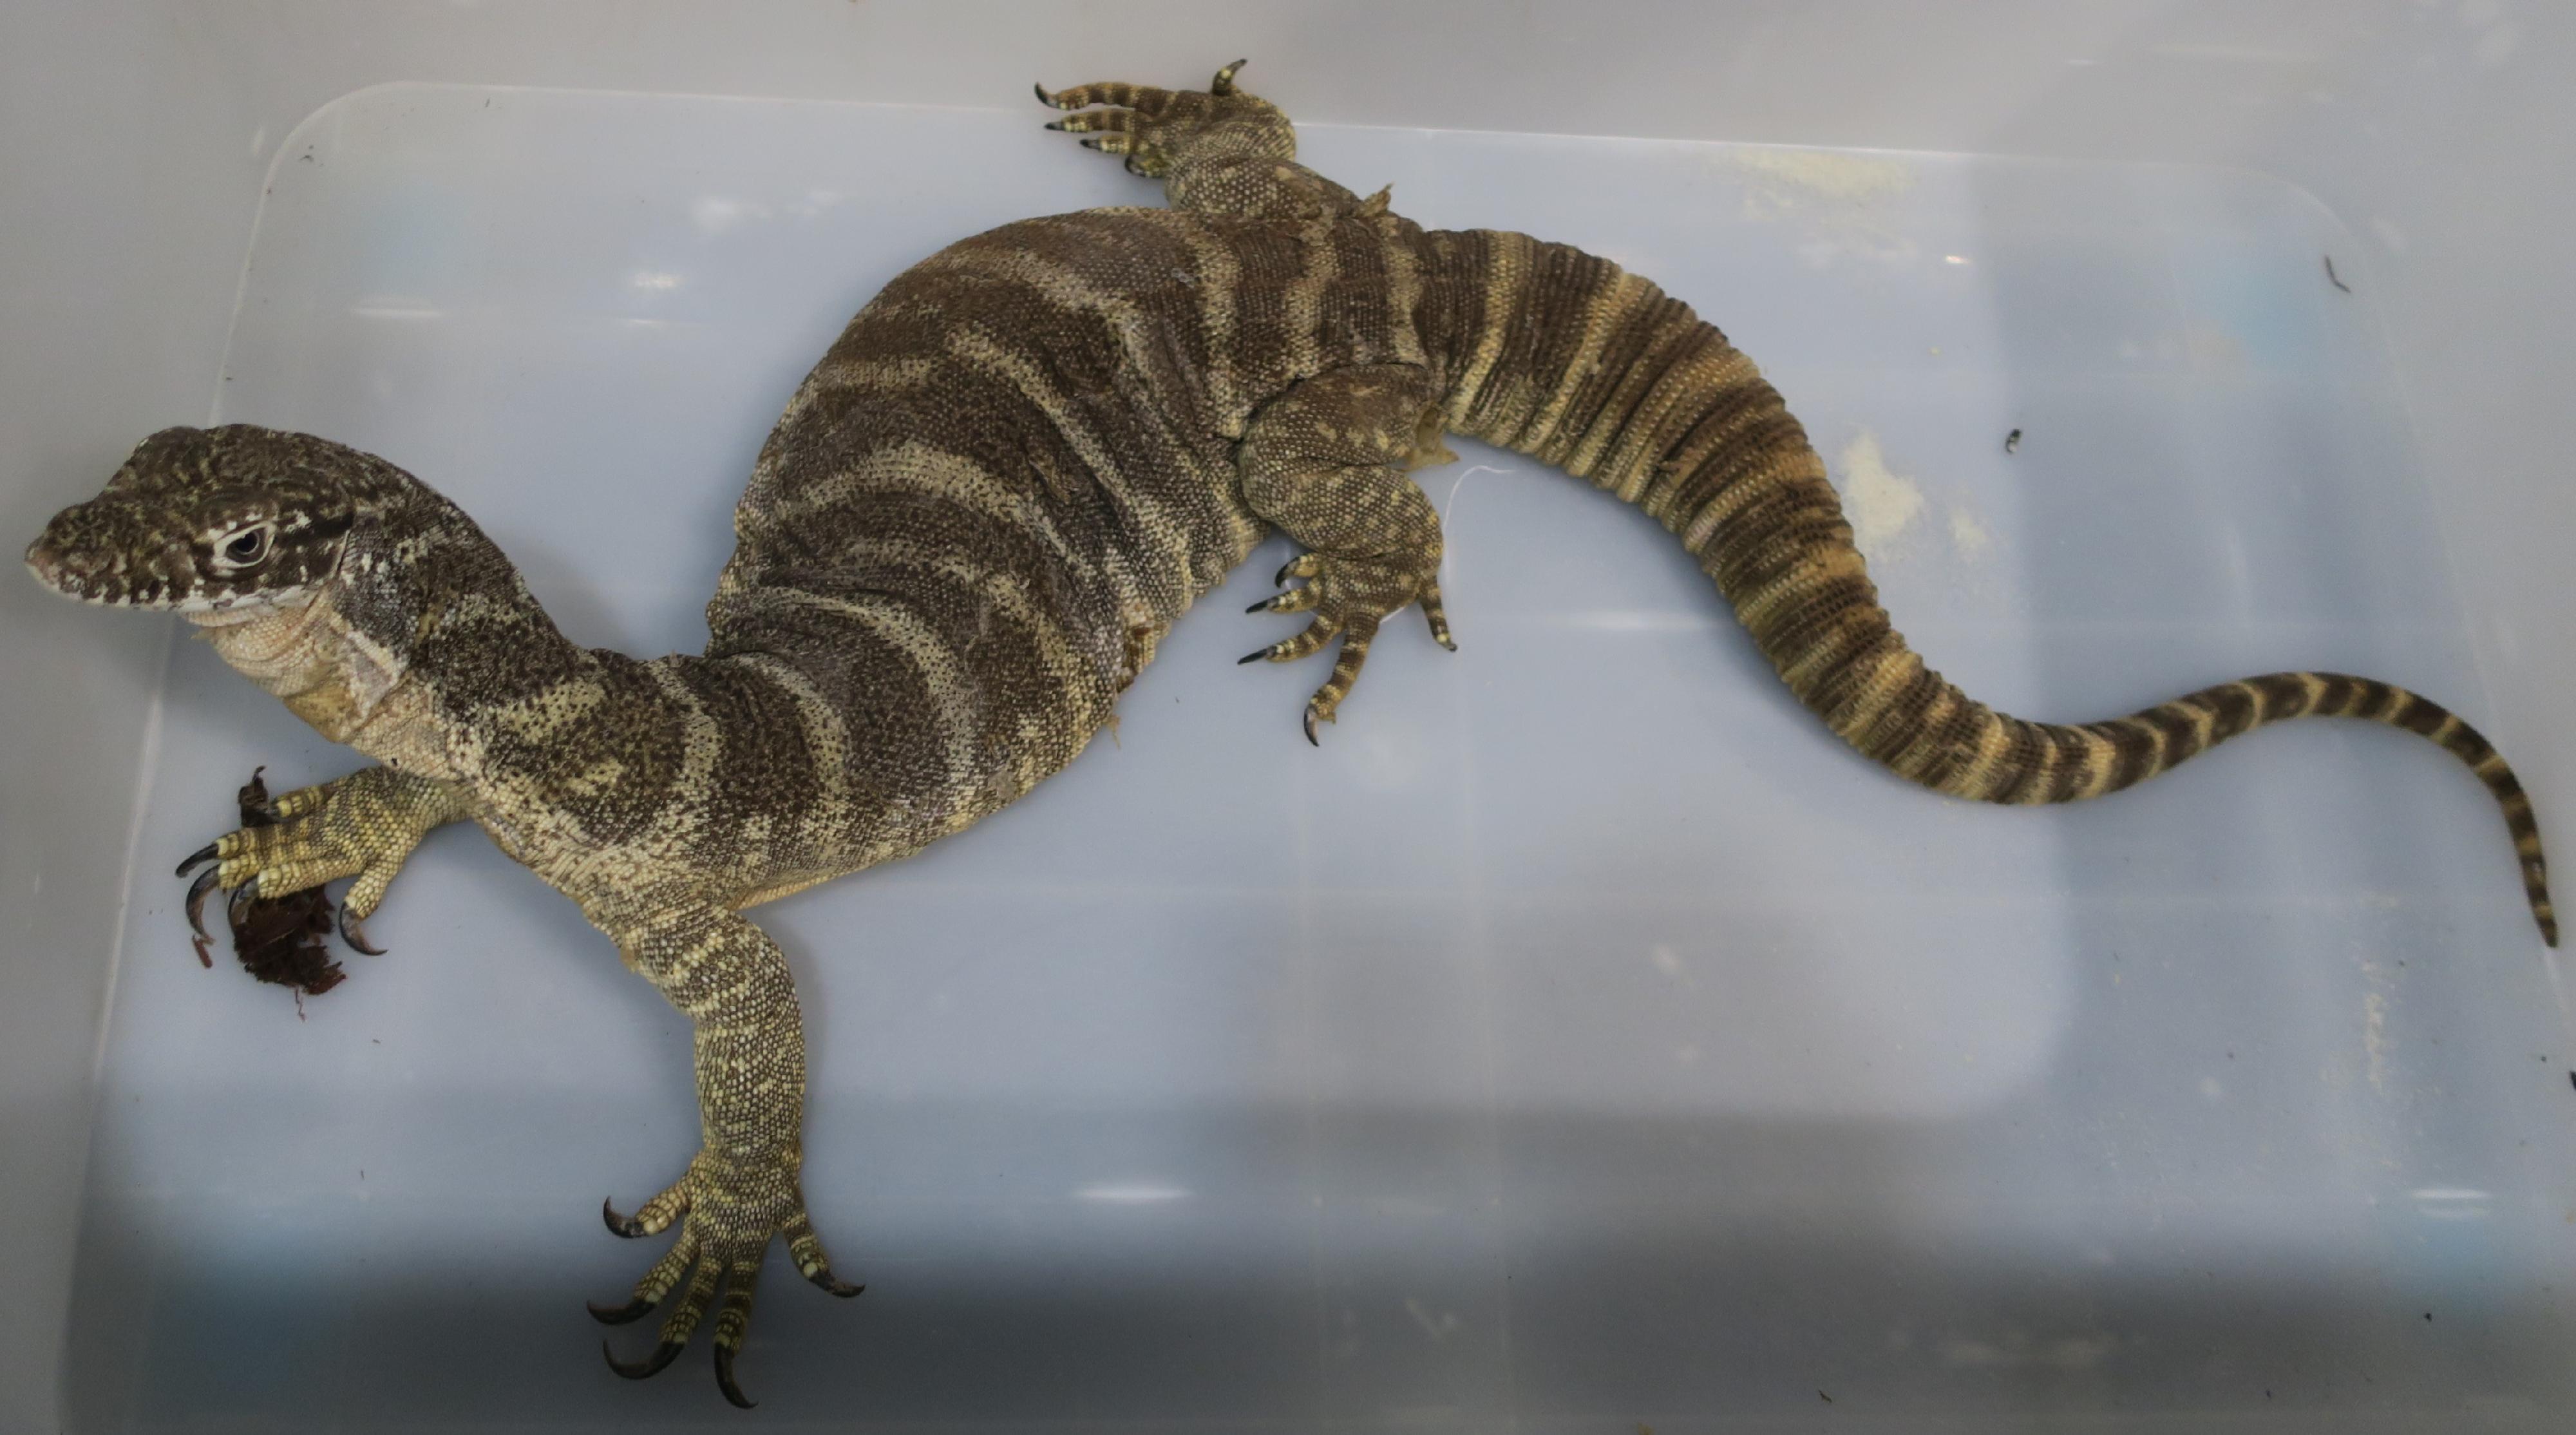 The Agriculture, Fisheries and Conservation Department seized three live endangered animals and an endangered animal specimen suspected to be illegally possessed in an exhibition today (September 23). Photo shows the seized live Spencer's monitor.